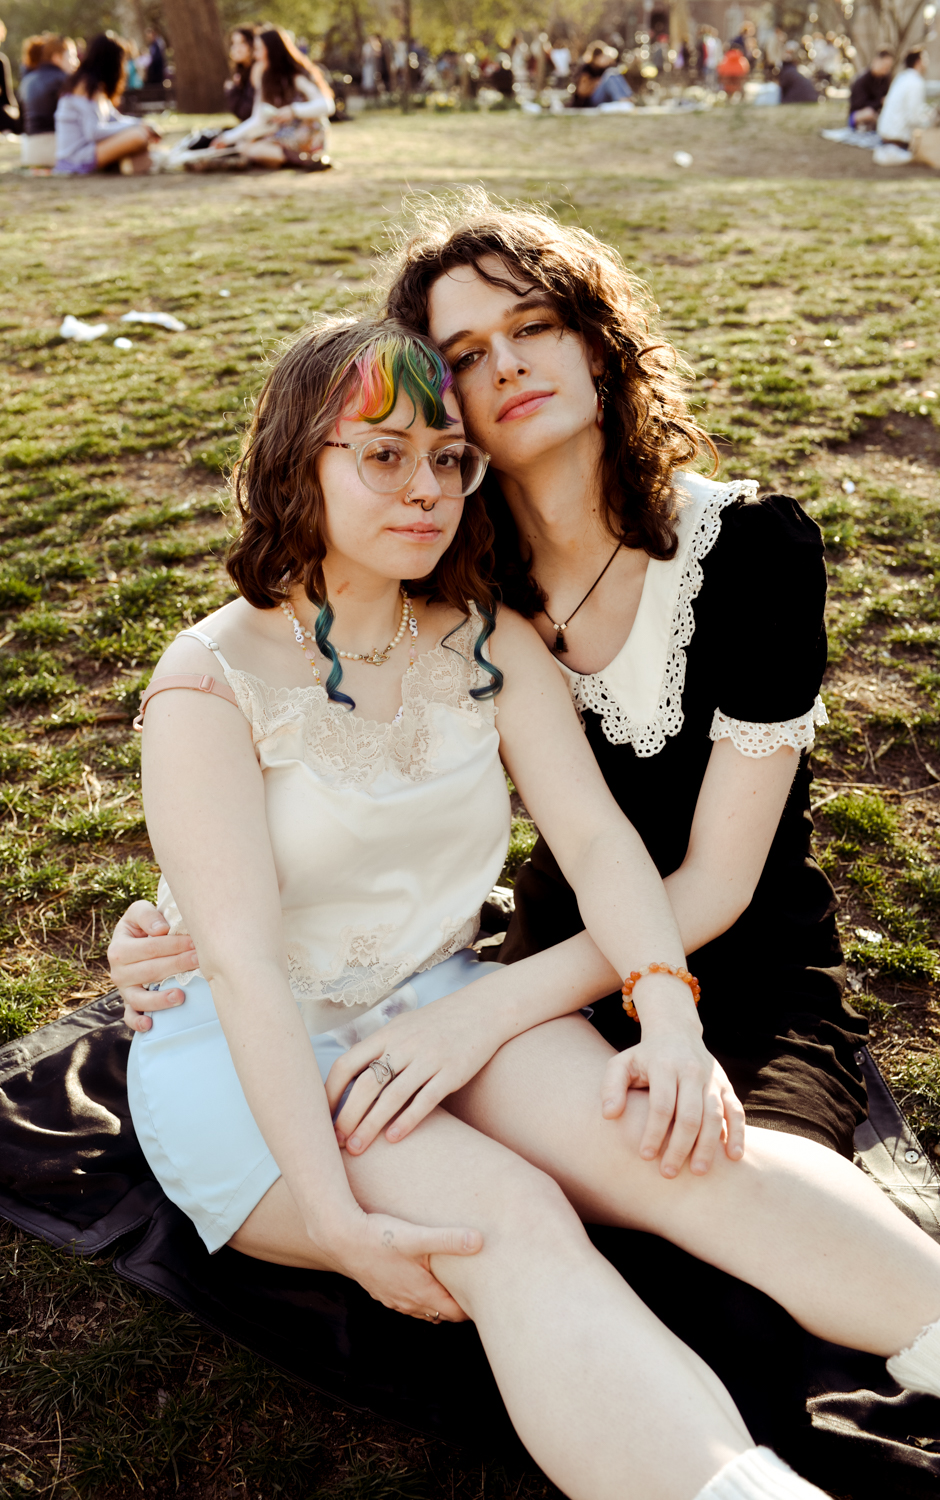 Saoirse Sowell and Ariel Rond sit together on the grass in a park with the sun shining on them.